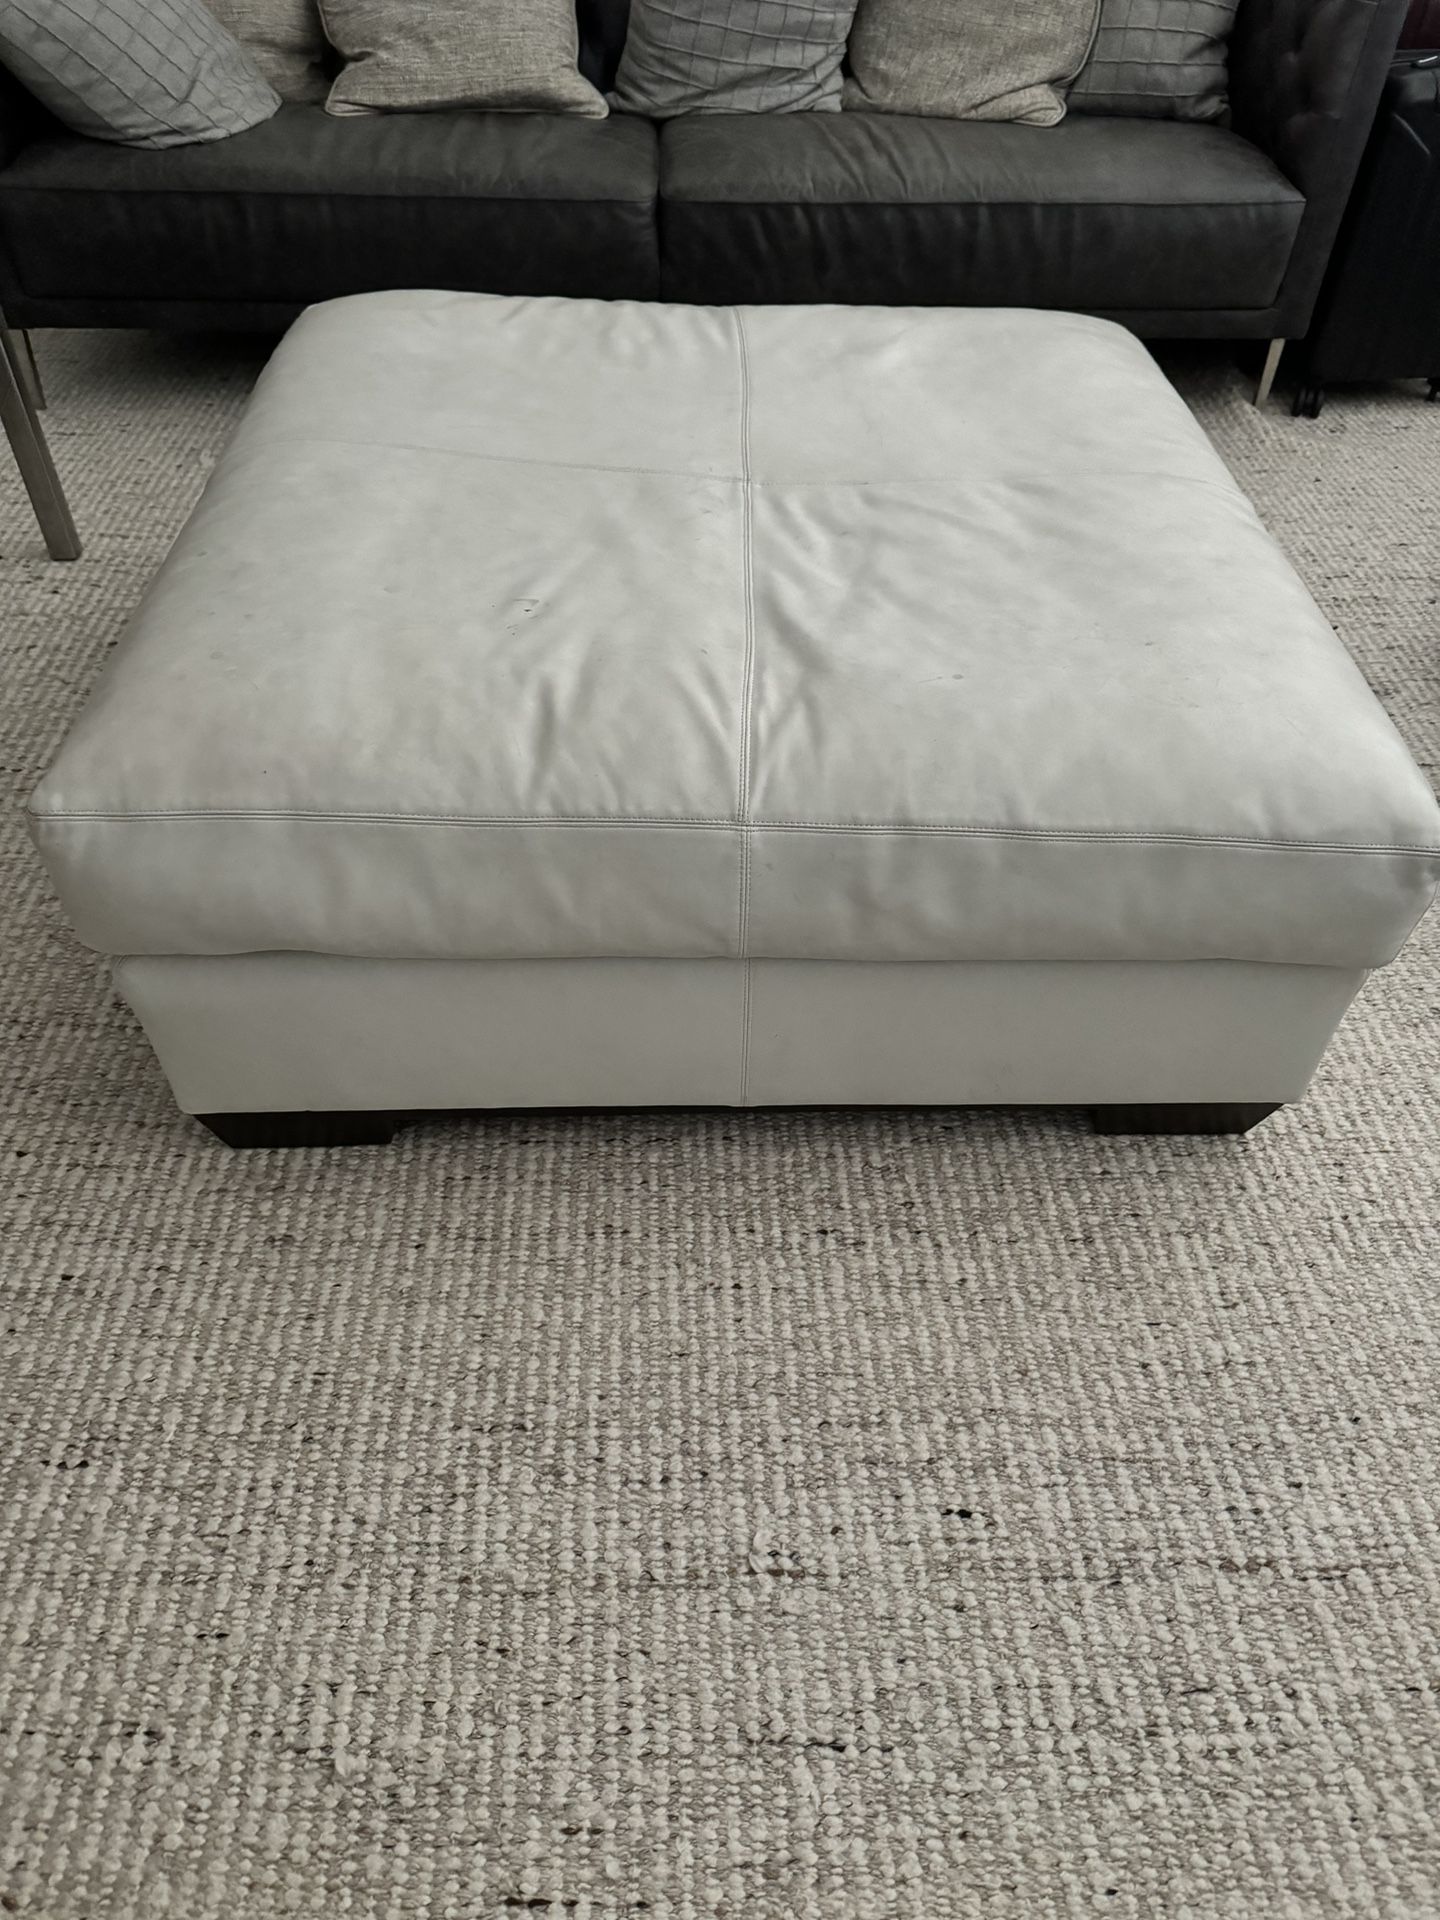 Crate and Barrel Leather Ottoman